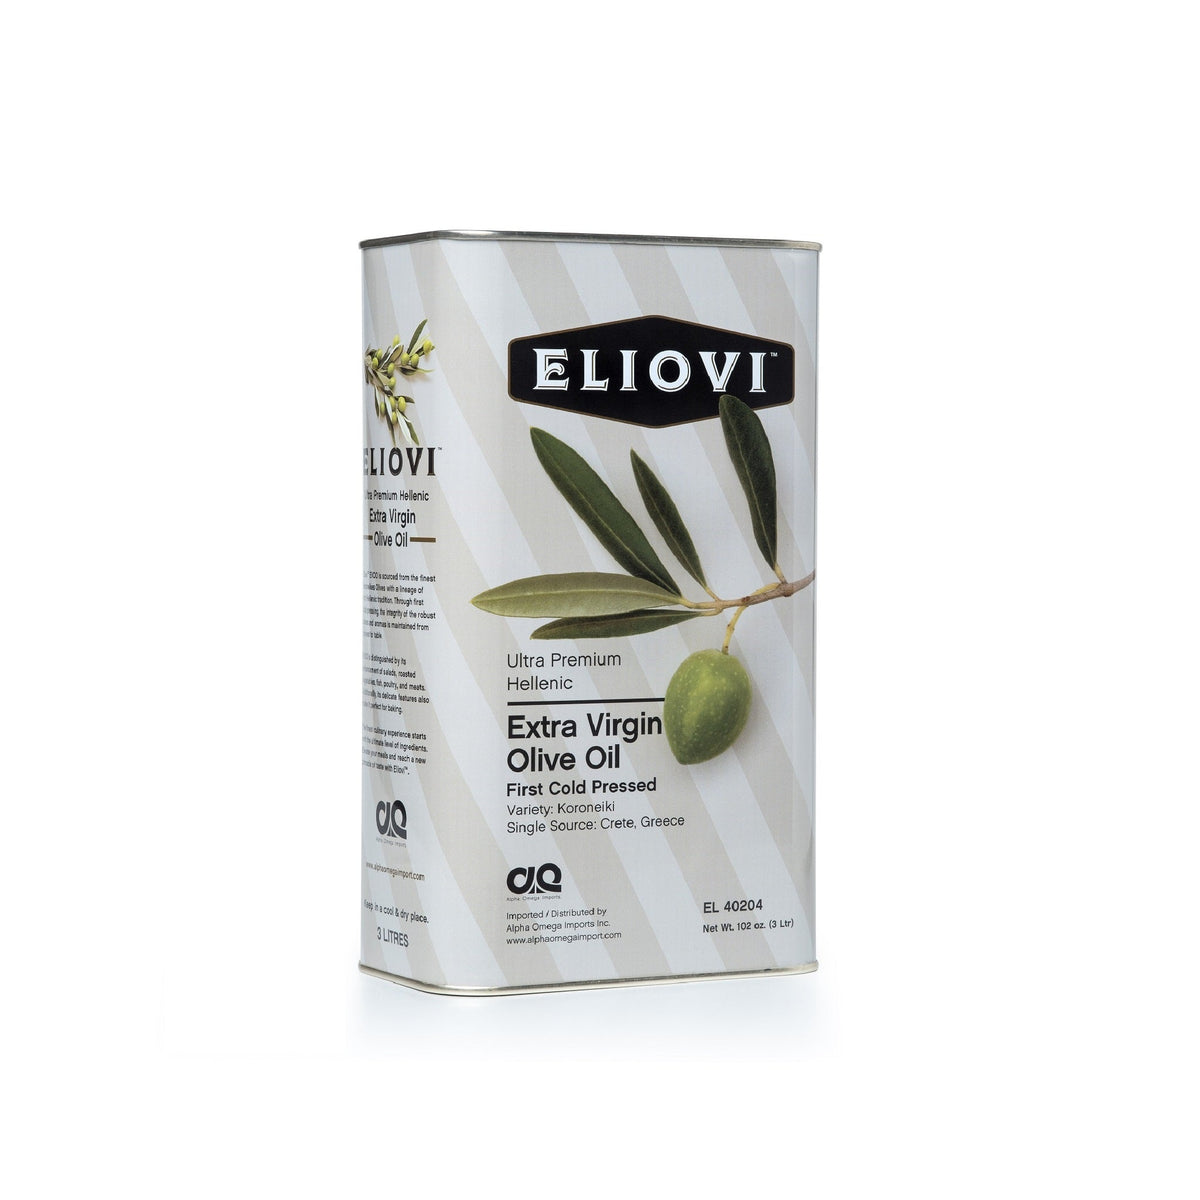 Eliovi Extra Virgin Olive Oil from Eastern Crete - Premium Quality, First Cold-Pressed Koroneiki Olives 101.4 fl oz, by Alpha Omega Imports